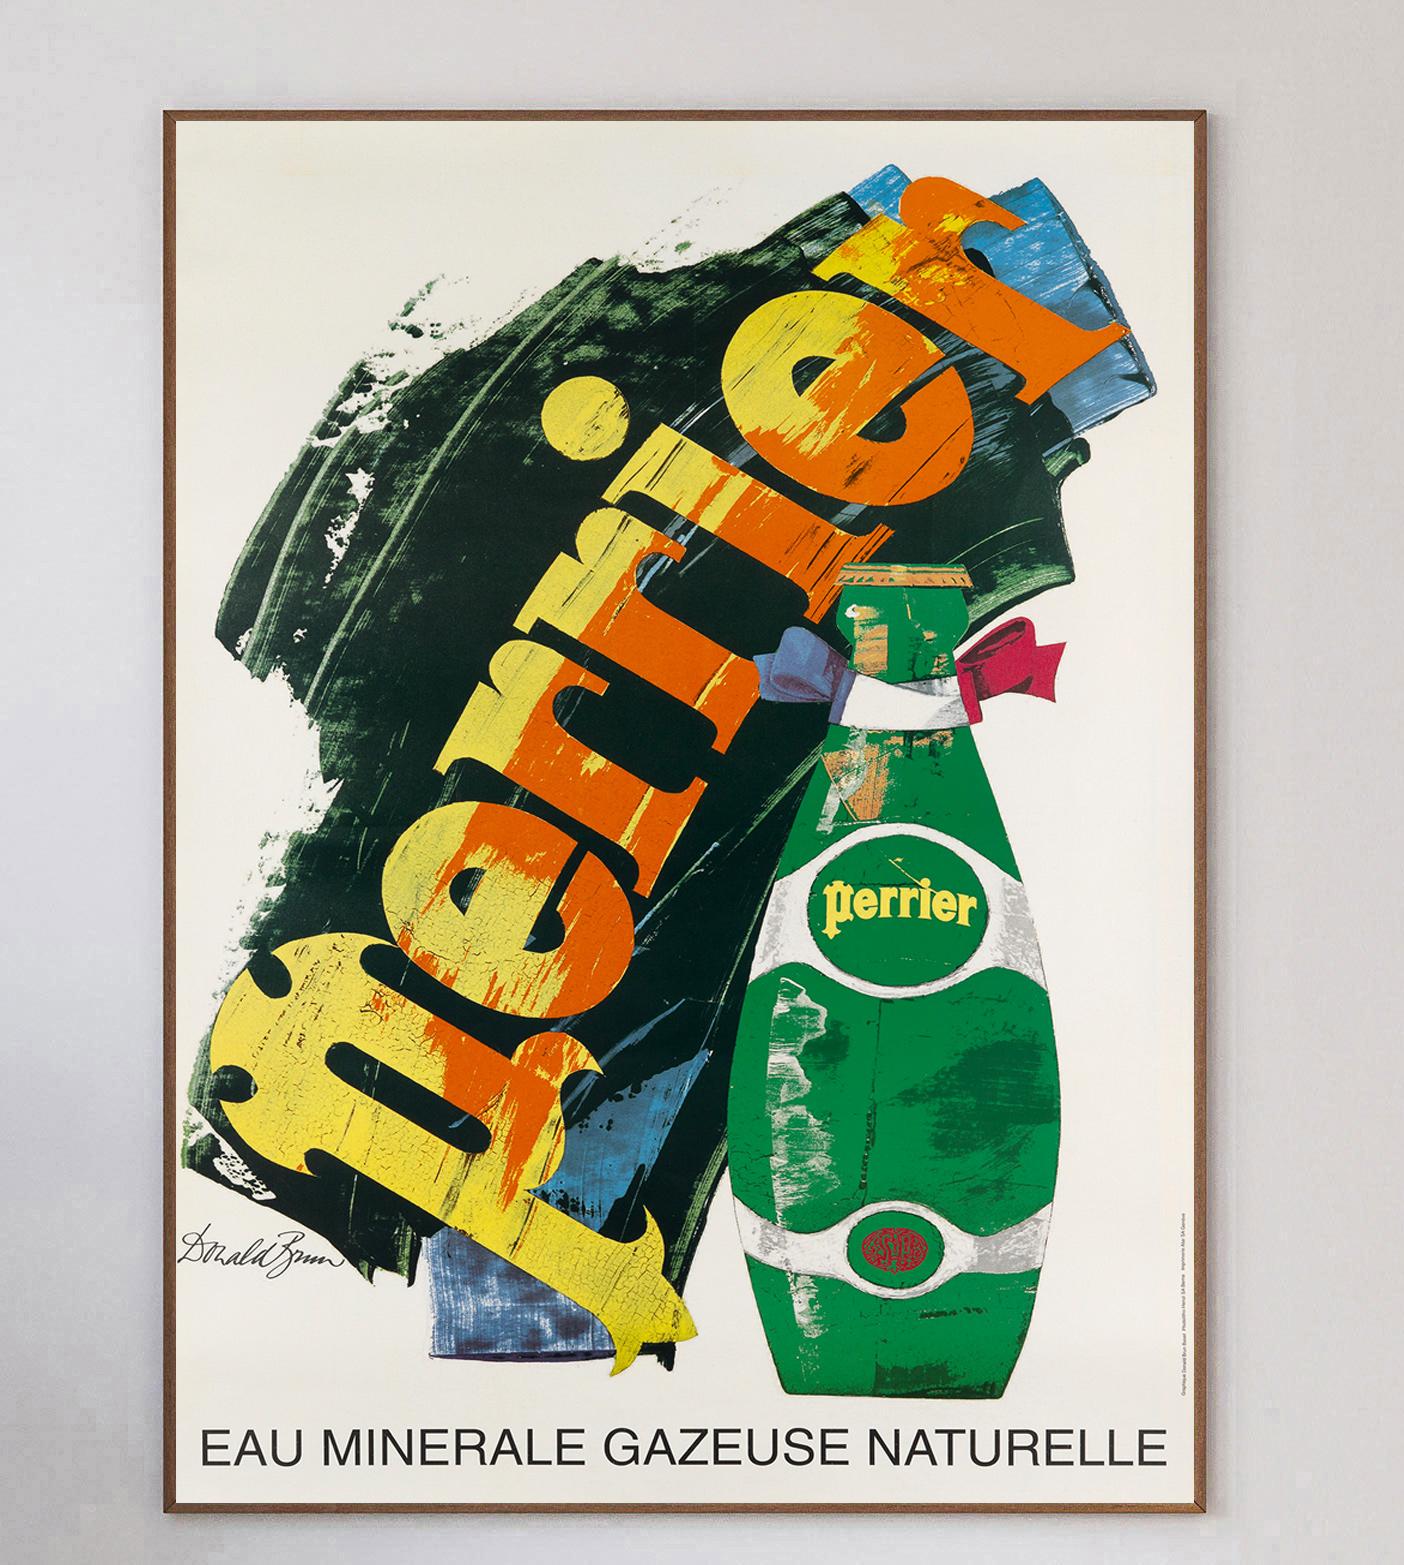 This beautiful for Perrier was designed by poster and graphic designer Donald Brun. This French poster has a fantastic kinetic design, depicting the iconic green Perrier bottle and logo.

Donald Brun was a renowned graphic designer from